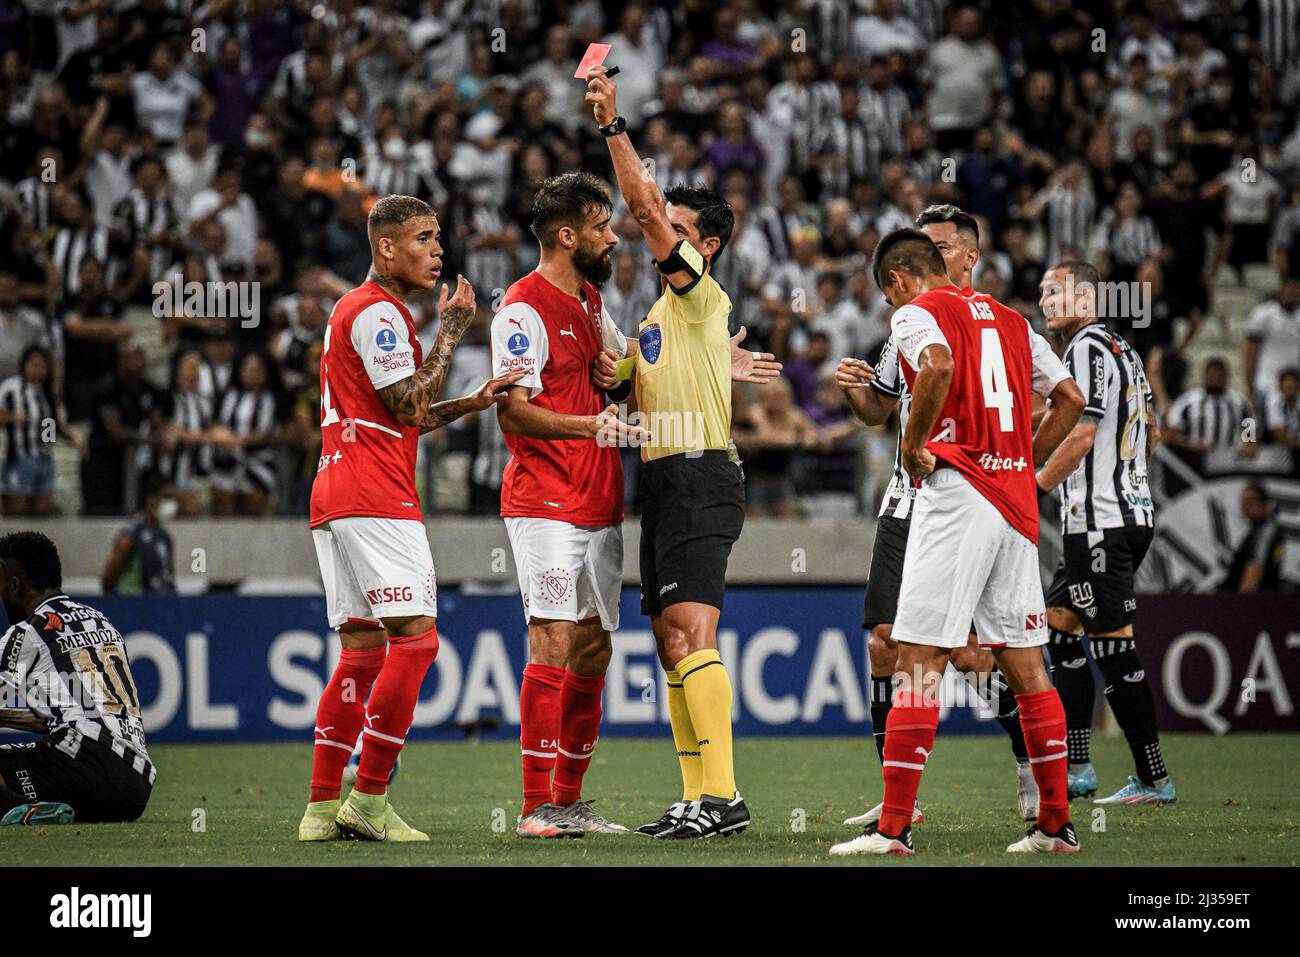 Fortaleza, Brazil. 05th Apr, 2022. CE - Fortaleza - 04/05/2022 - COPA SOUTH AMERICANA 2022, CEARA X INDEPEDIENTE - Independiente player Costa receives a red card from the referee during a match against Ceara at the Arena Castelao stadium for the Copa Sudamericana 2022 championship. Photo: Kely Pereira /AGIF Credit: AGIF/Alamy Live News Stock Photo